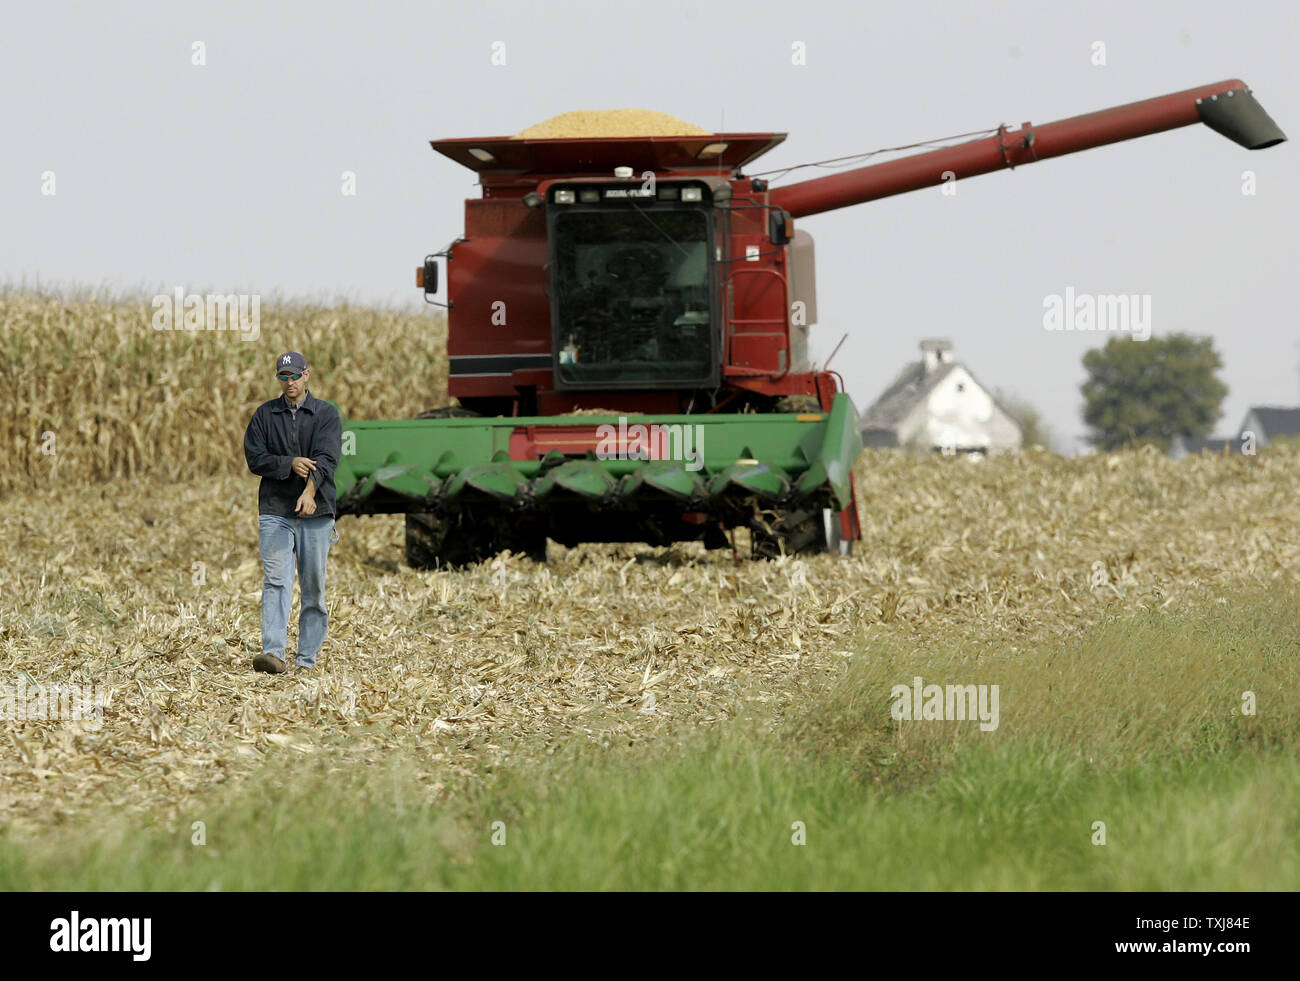 Brad Weber harvests corn on land he rents near Manteno, Illinois on October 20, 2008. Weber farms 450 acres part-time but hopes to acquire more land so that he can be a full-time farmer. Corn for December delivery rose $0.155 per bushel at the Chicago Board of Trade closing at $4.185 Monday as rebounding oil markets shift investor focus to commodities. (UPI Photo/Brian Kersey) Stock Photo